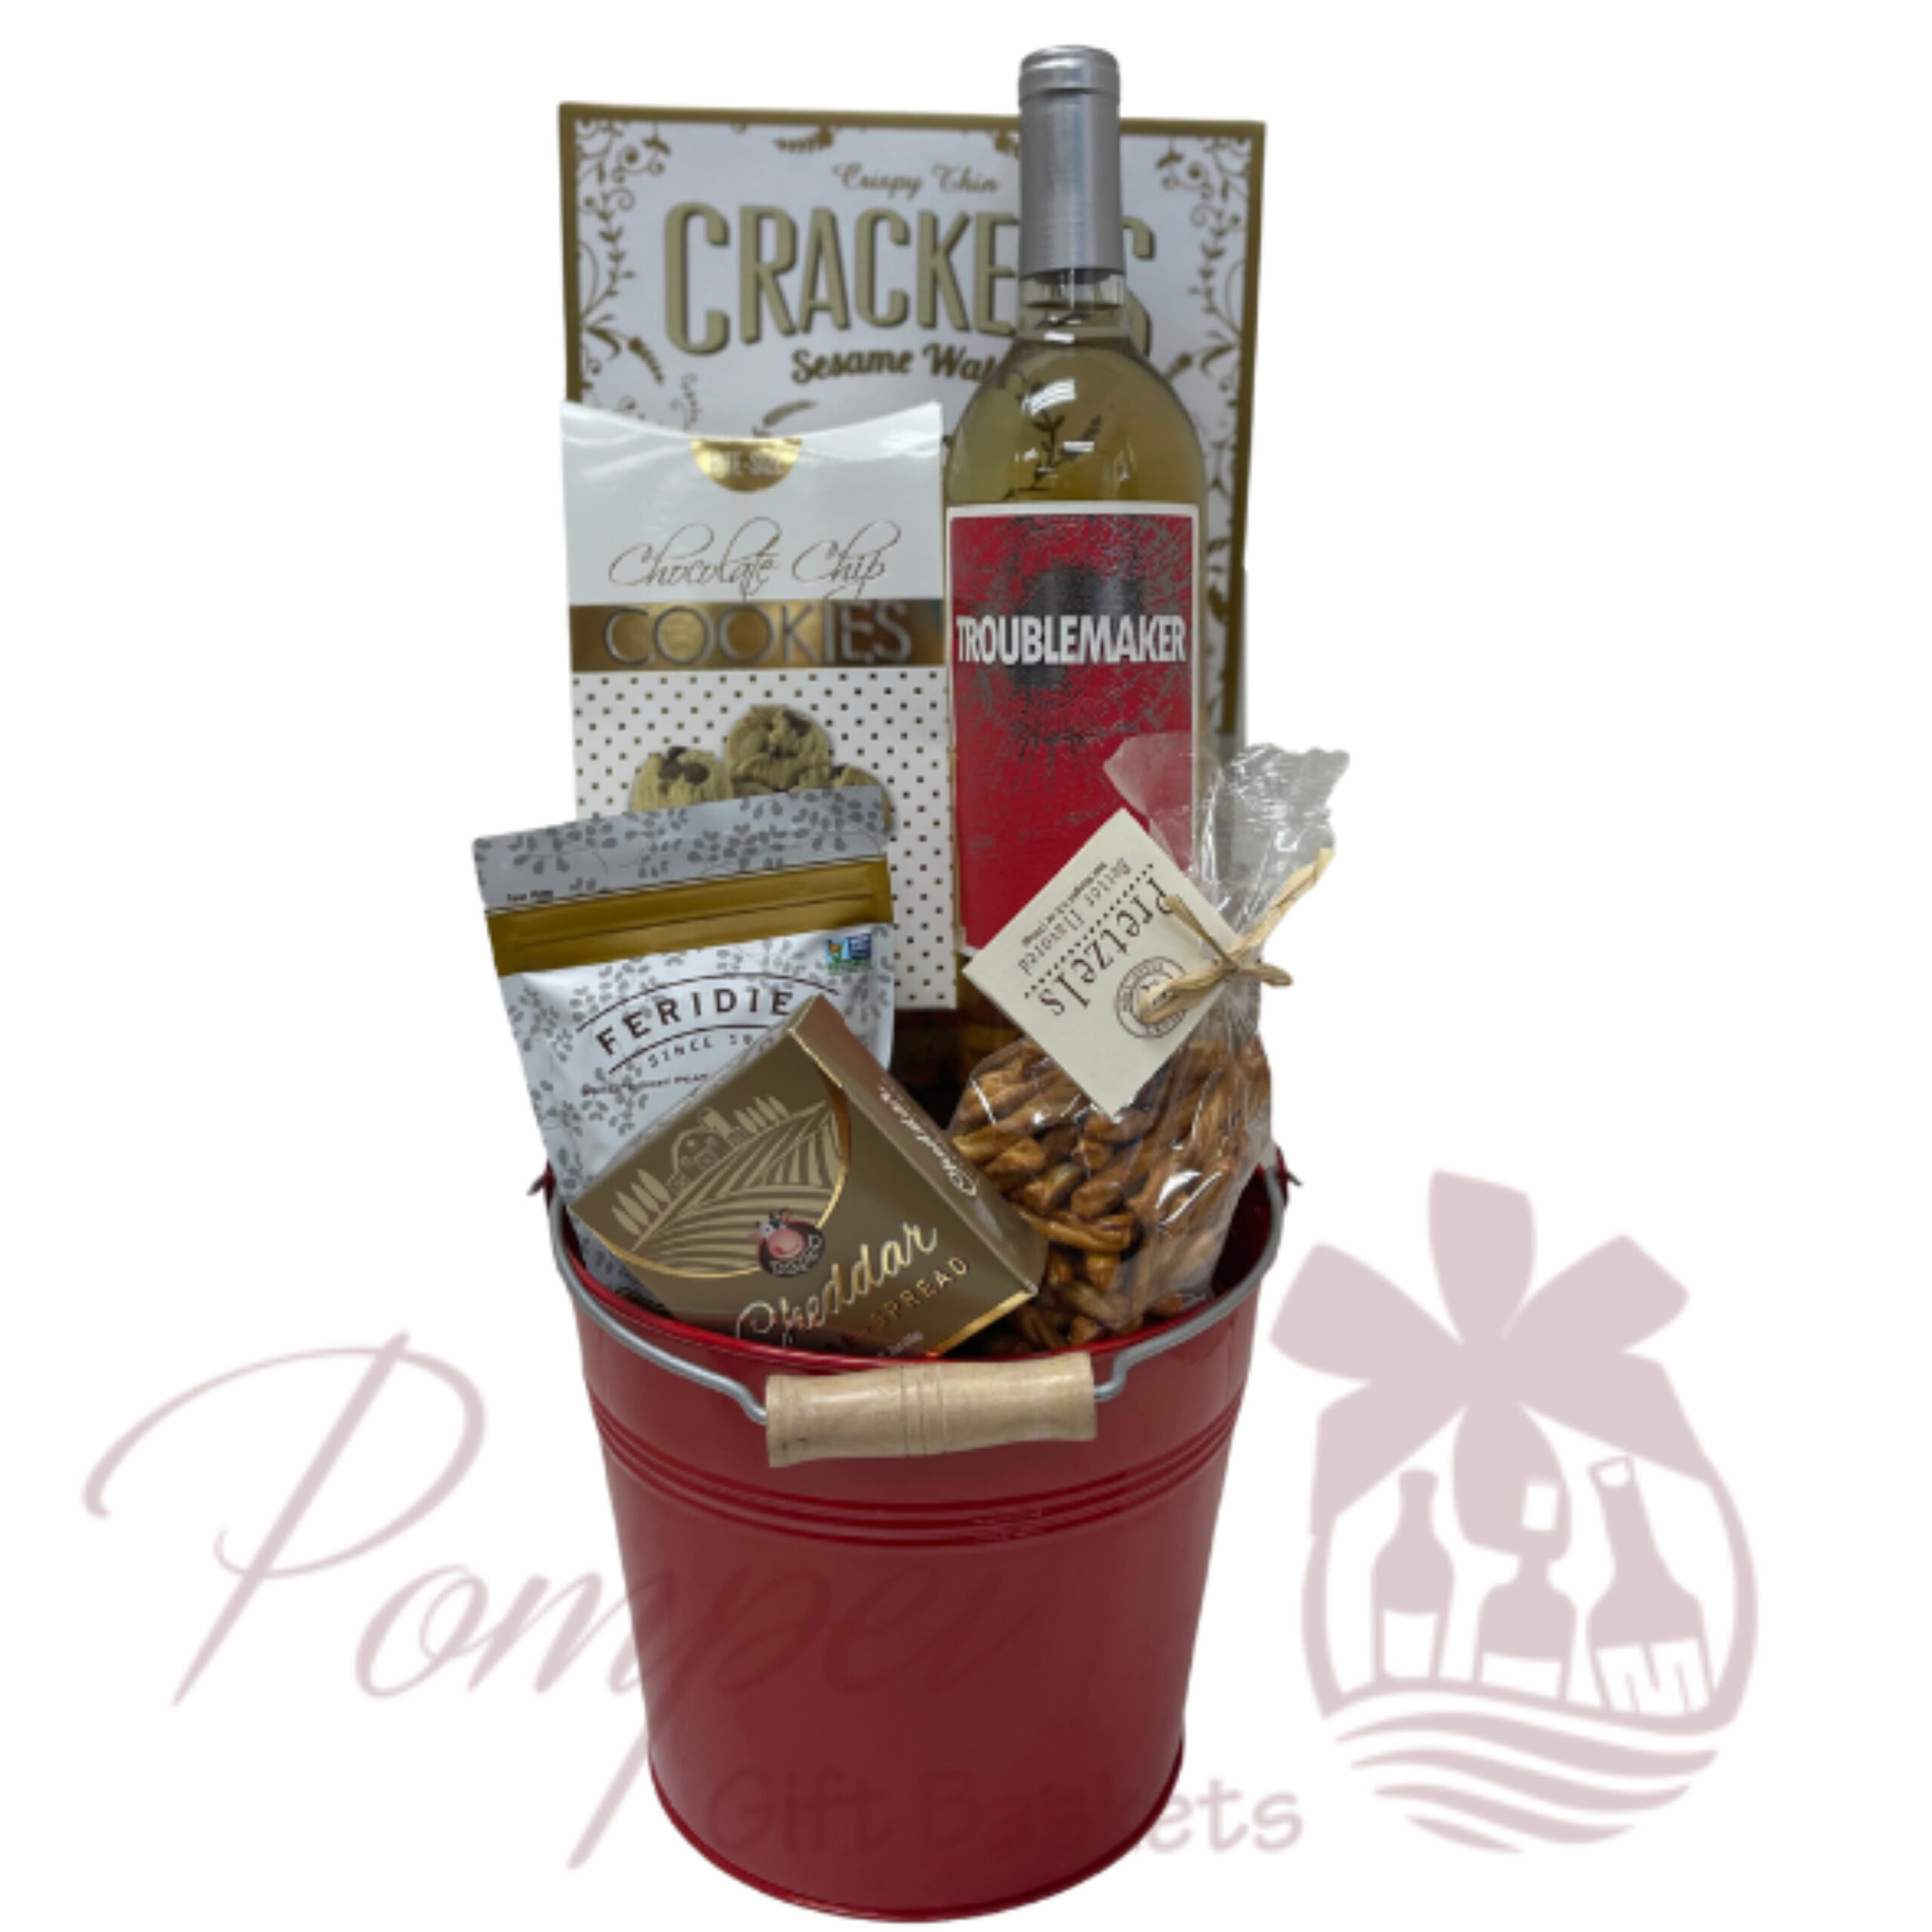 Night on the Town Wine Gift Basket by Pompei Baskets